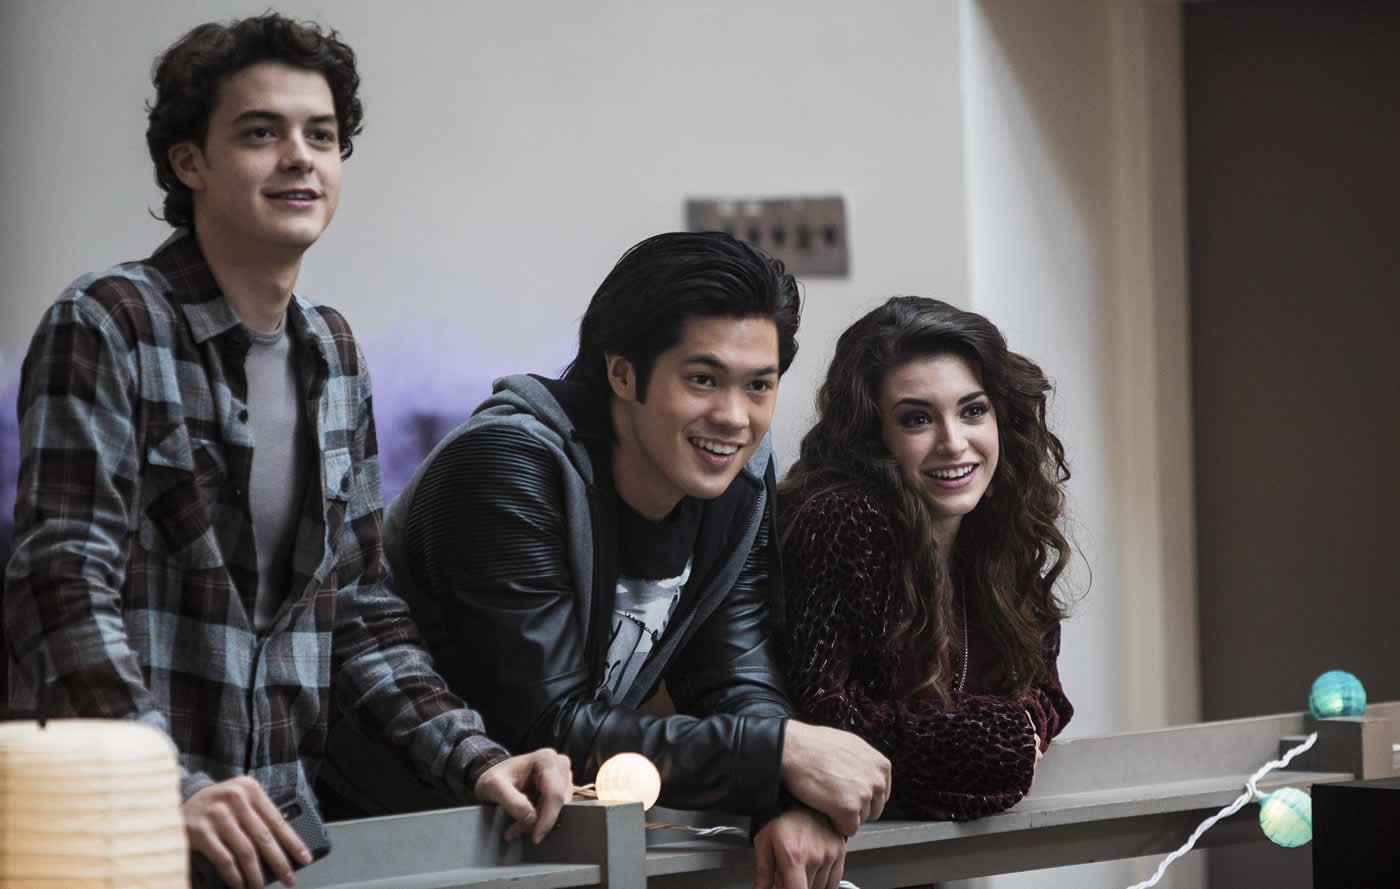 Israel Broussard, Ross Butler and Daniela Bobadilla in Lifetime's Perfect High (2016)